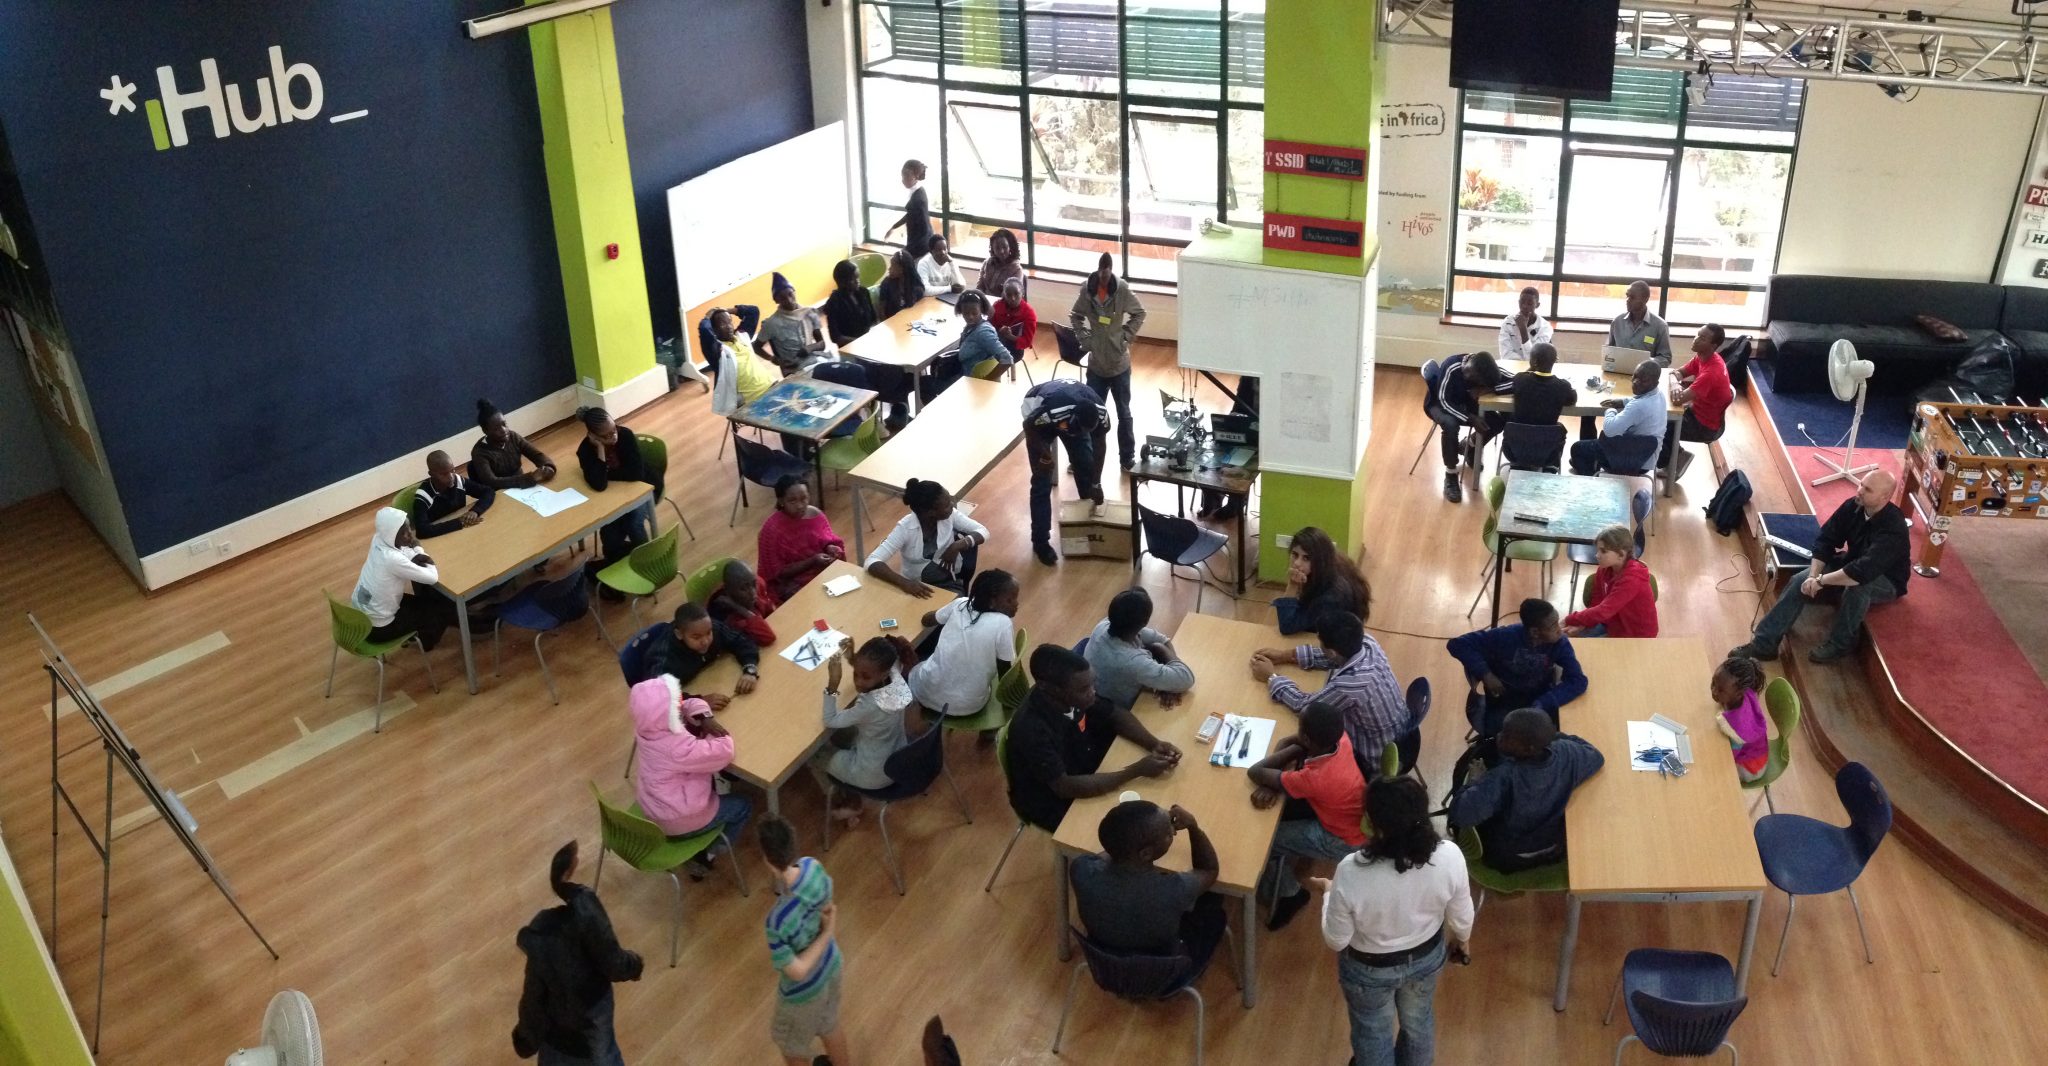 Nigeria's CcHUB acquires Kenya's iHub, marking the first time a tech hub  has acquired another | Pulselive Kenya